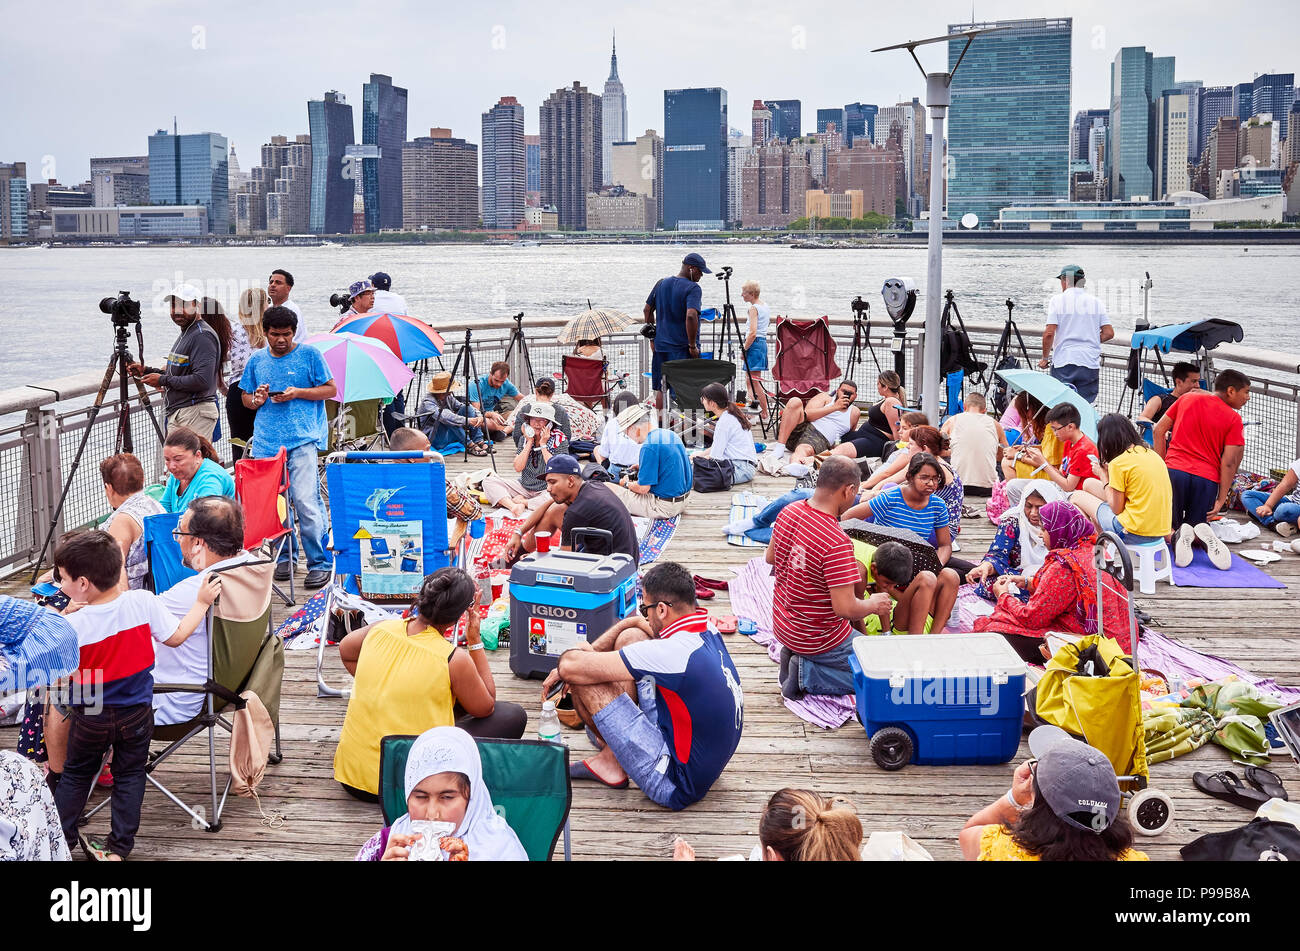 New York City, USA - July 4, 2018: People wait to watch Fourth of July Independence Day fireworks at a Long Island pier. Stock Photo